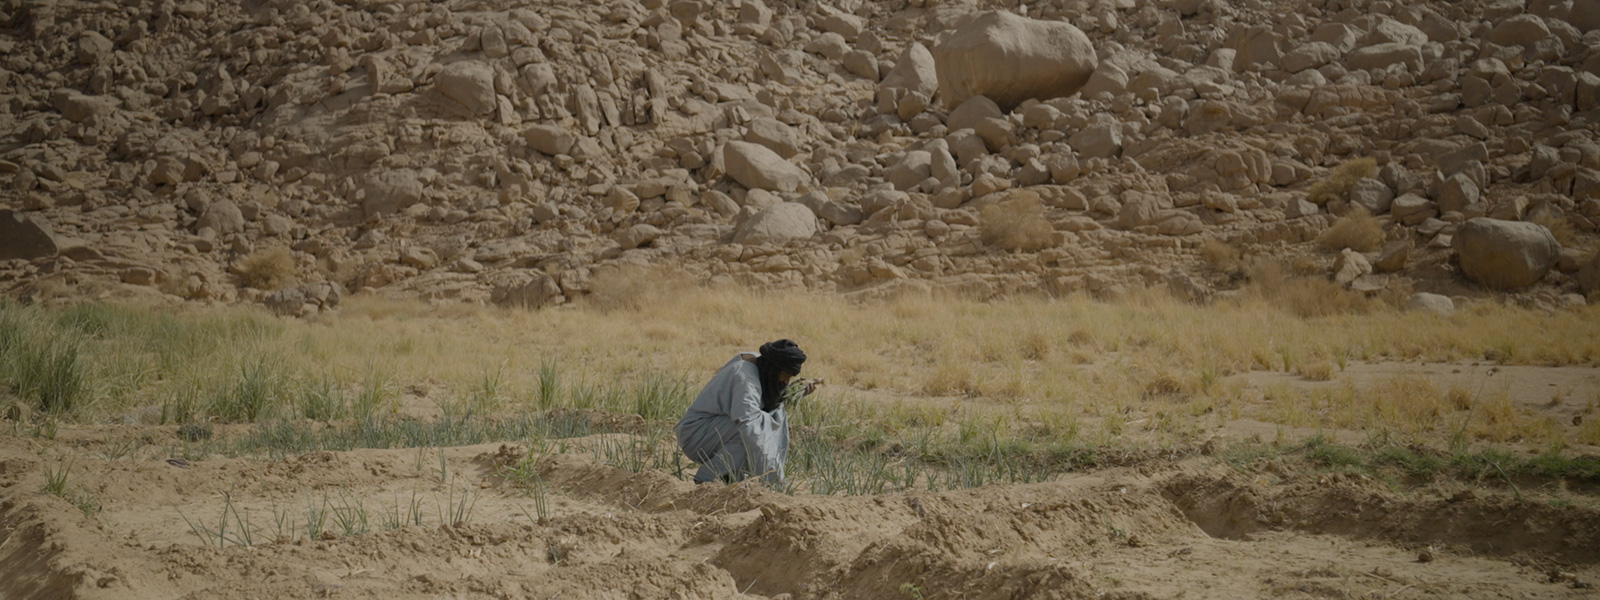 A person in light clothing and a dark headscarf crouches down in the desert looking at the ground